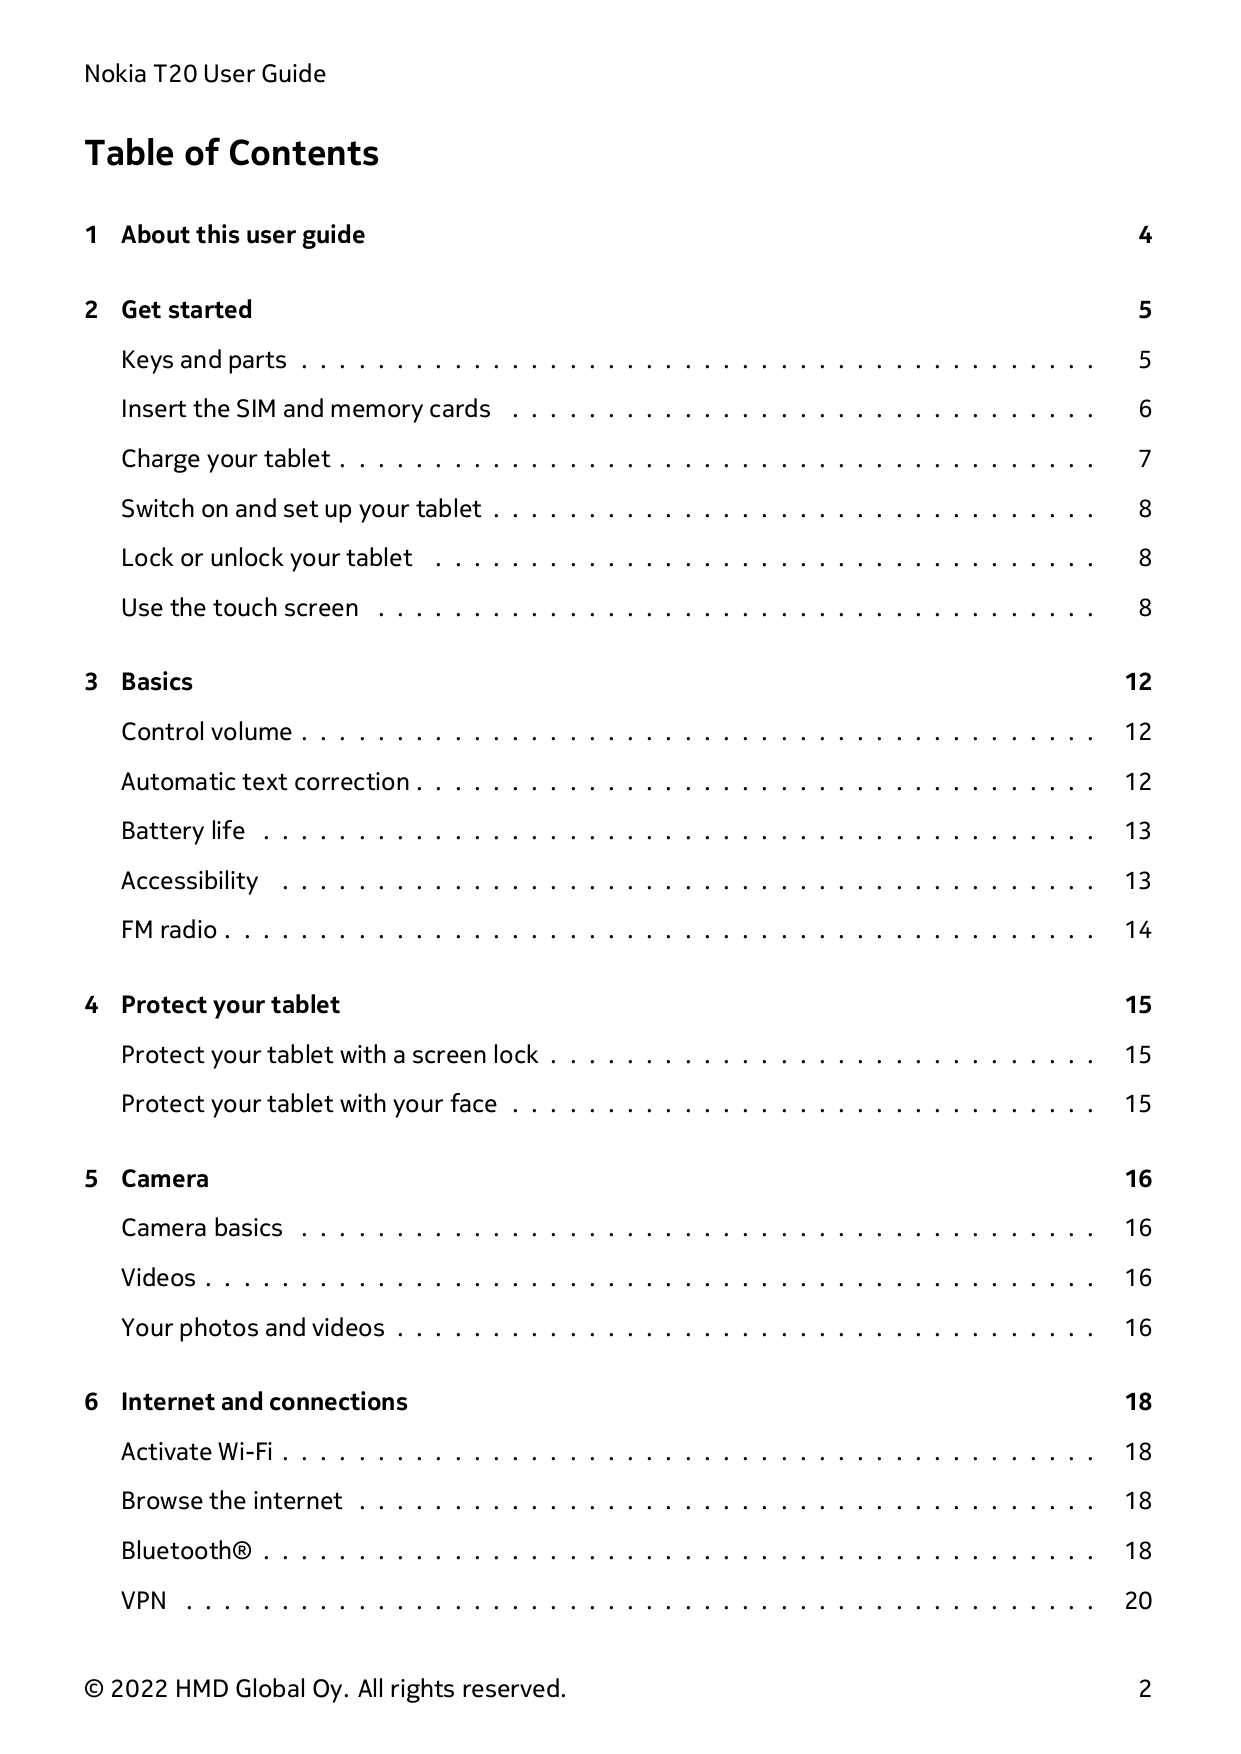 Nokia T20 User GuideTable of Contents1 About this user guide42 Get started5Keys and parts . . . . . . . . . . . . . . . . . . . 